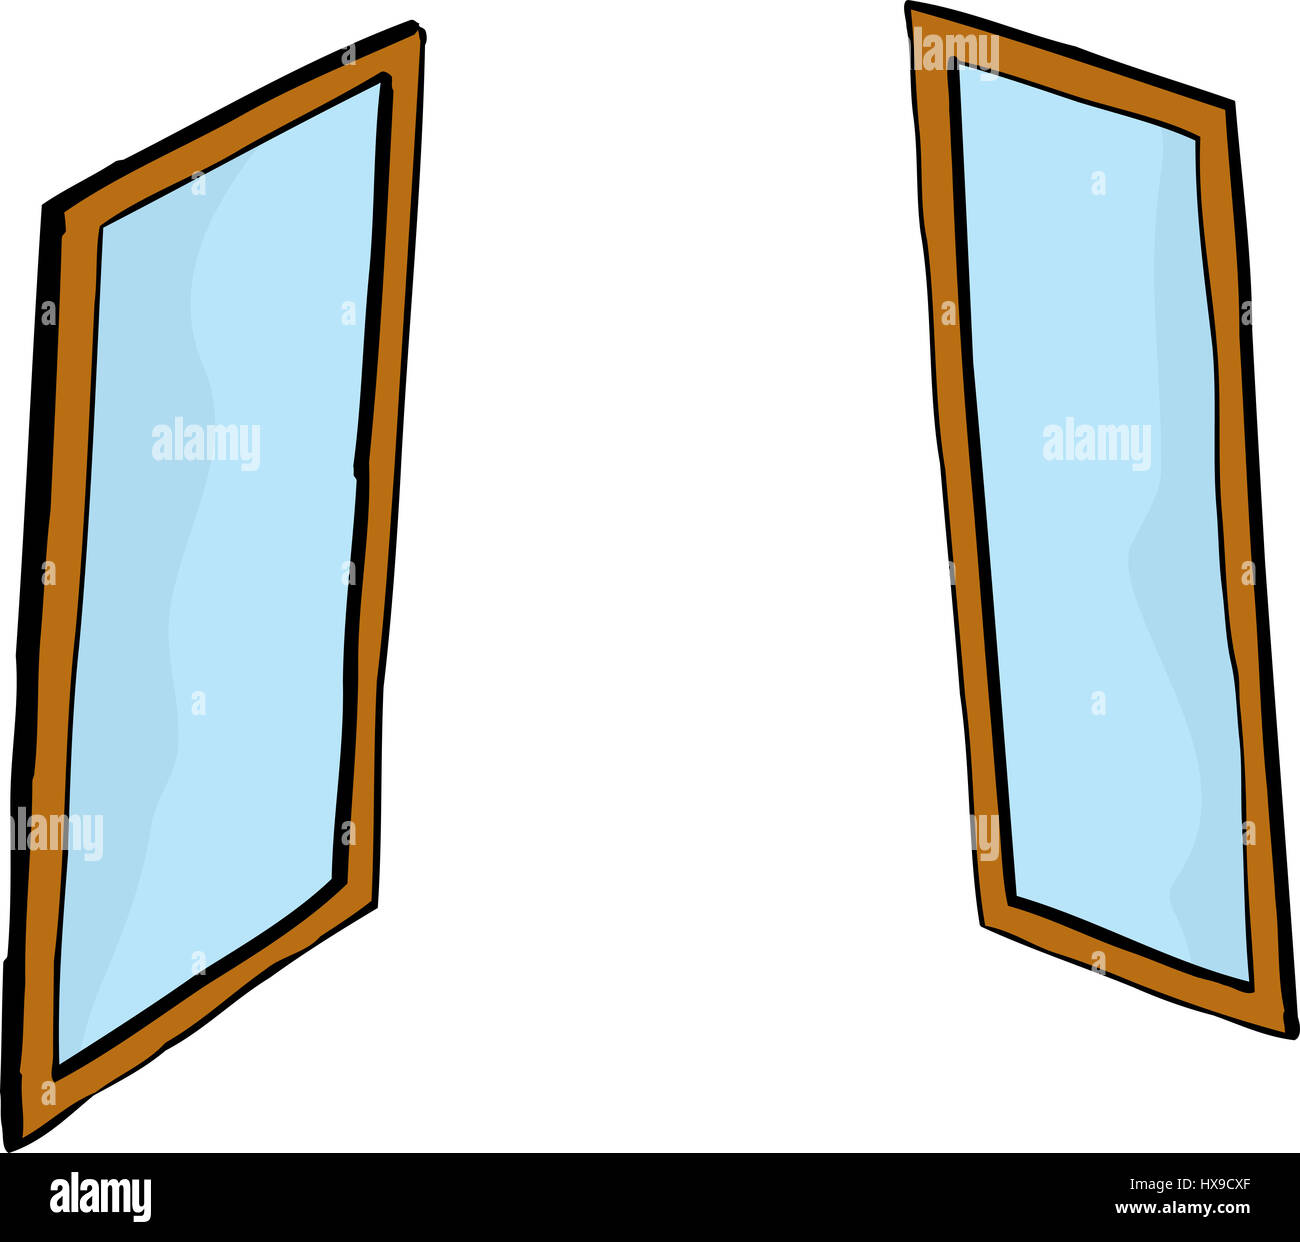 Mod Mirrored Graphic Panels Titled Bubbles- a Pair